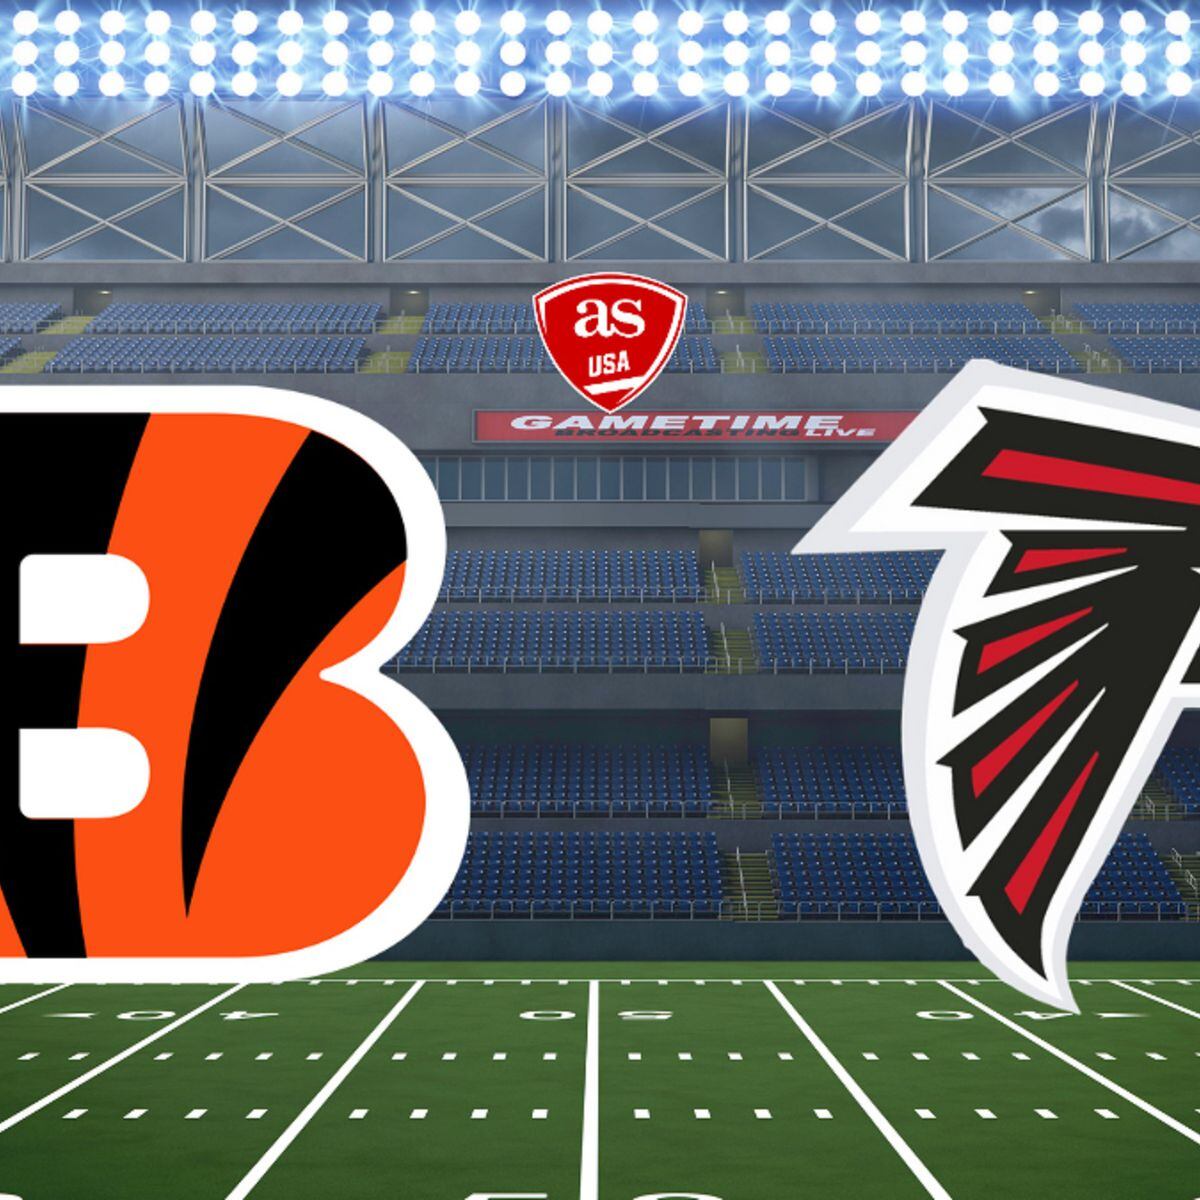 Bengals vs Colts Preseason Week 4: Game time, TV schedule, online stream,  announcers, replay - Cincy Jungle